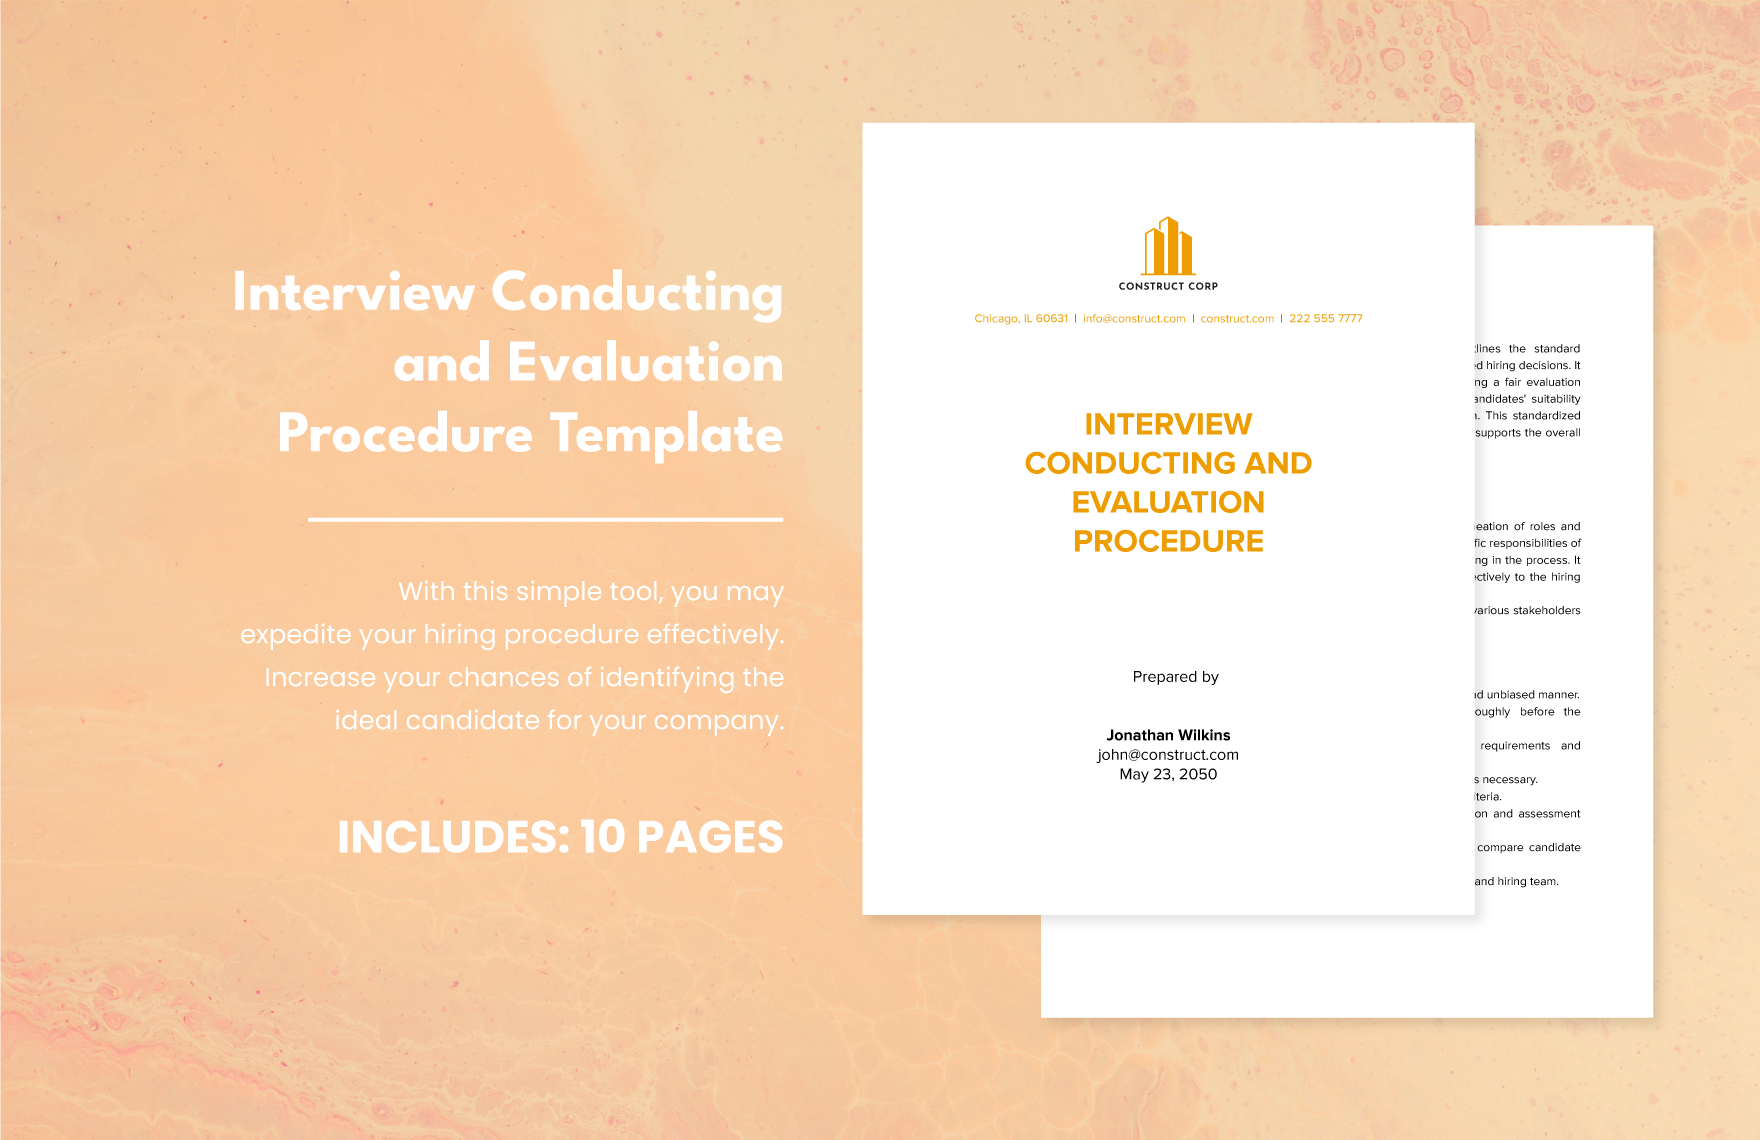 Interview Conducting and Evaluation Procedure Template